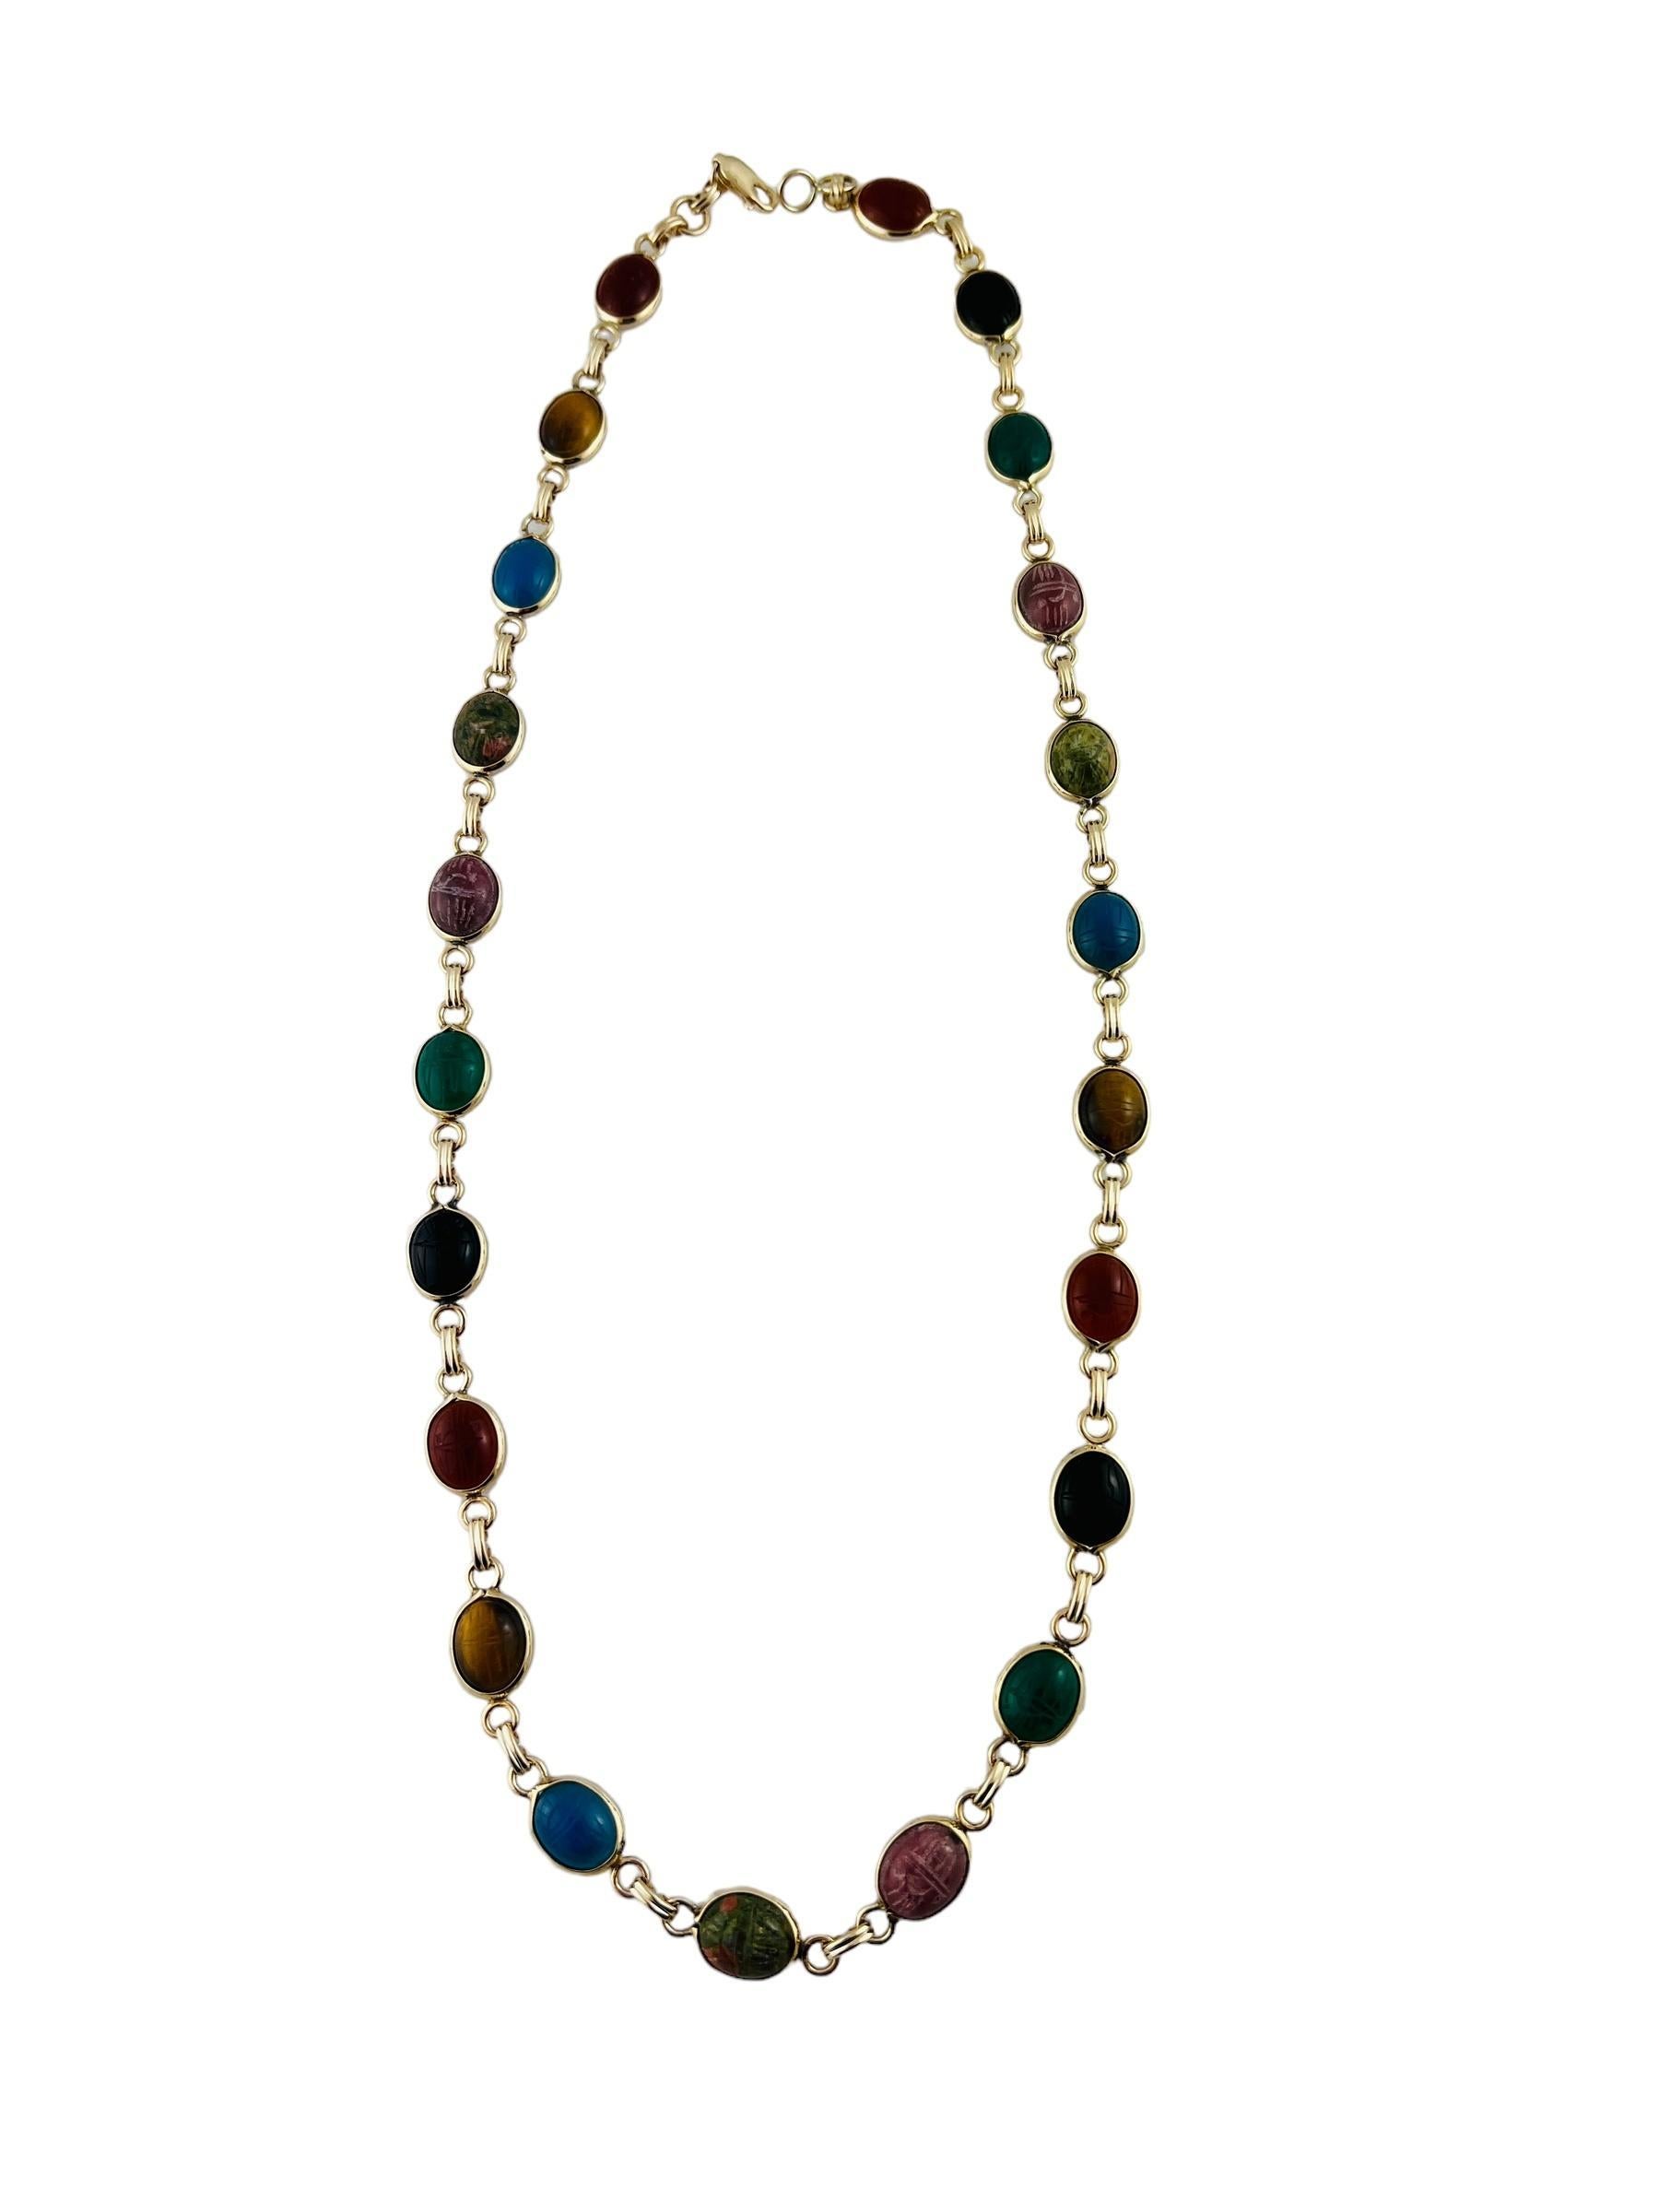 14K Yellow Gold Scarab Necklace 

This beautiful scarab necklace is set in 14K yellow gold and is set with blue, pink, green, red, black and yellow scarab stones

20